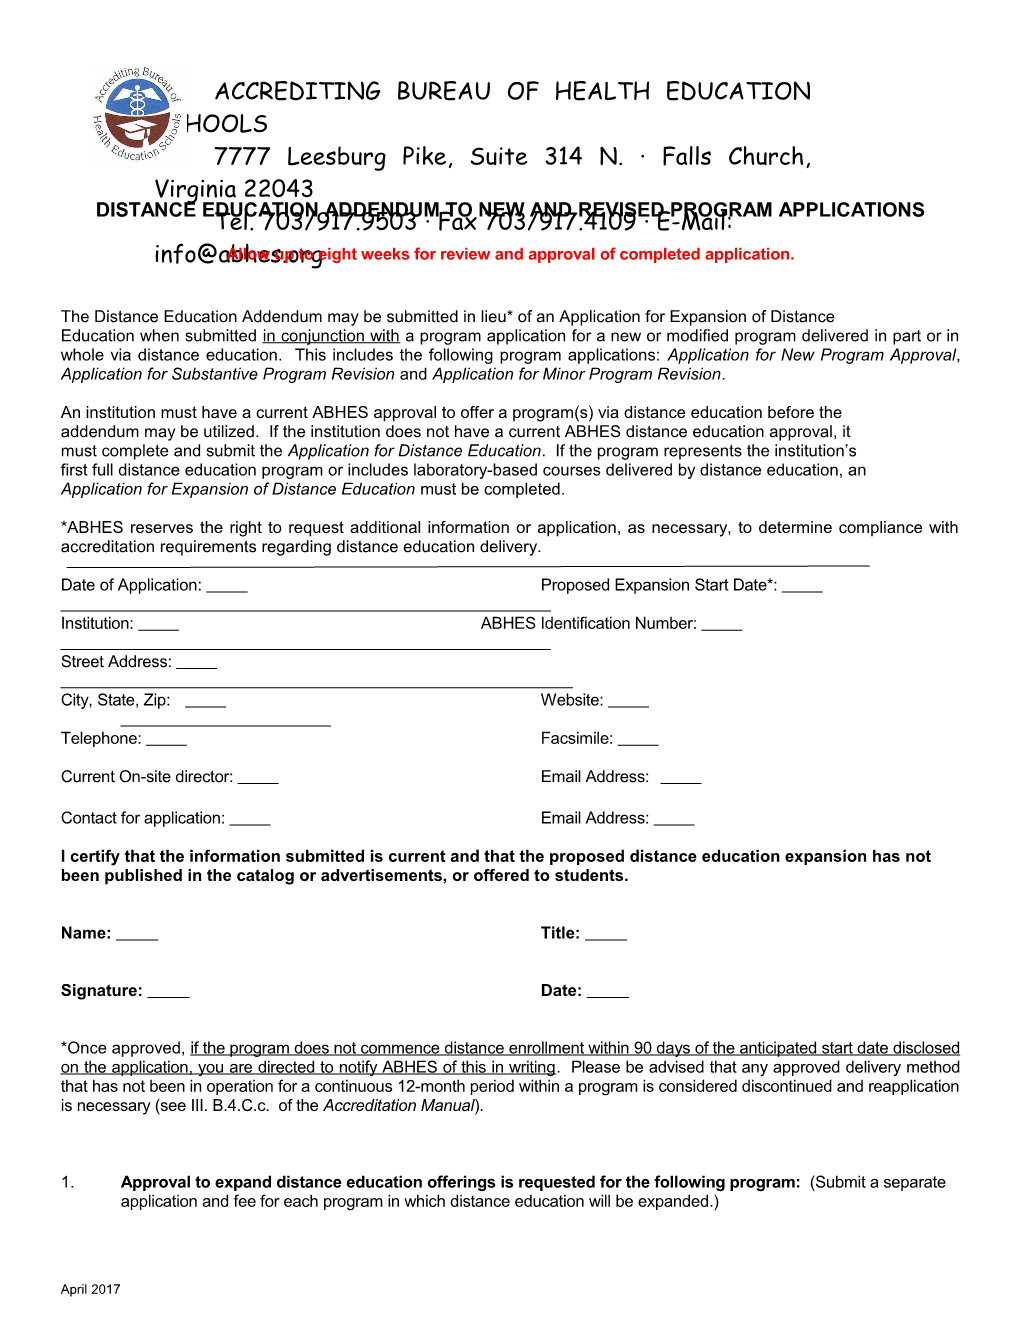 Distance Educationaddendum to New and Revised Program Applications